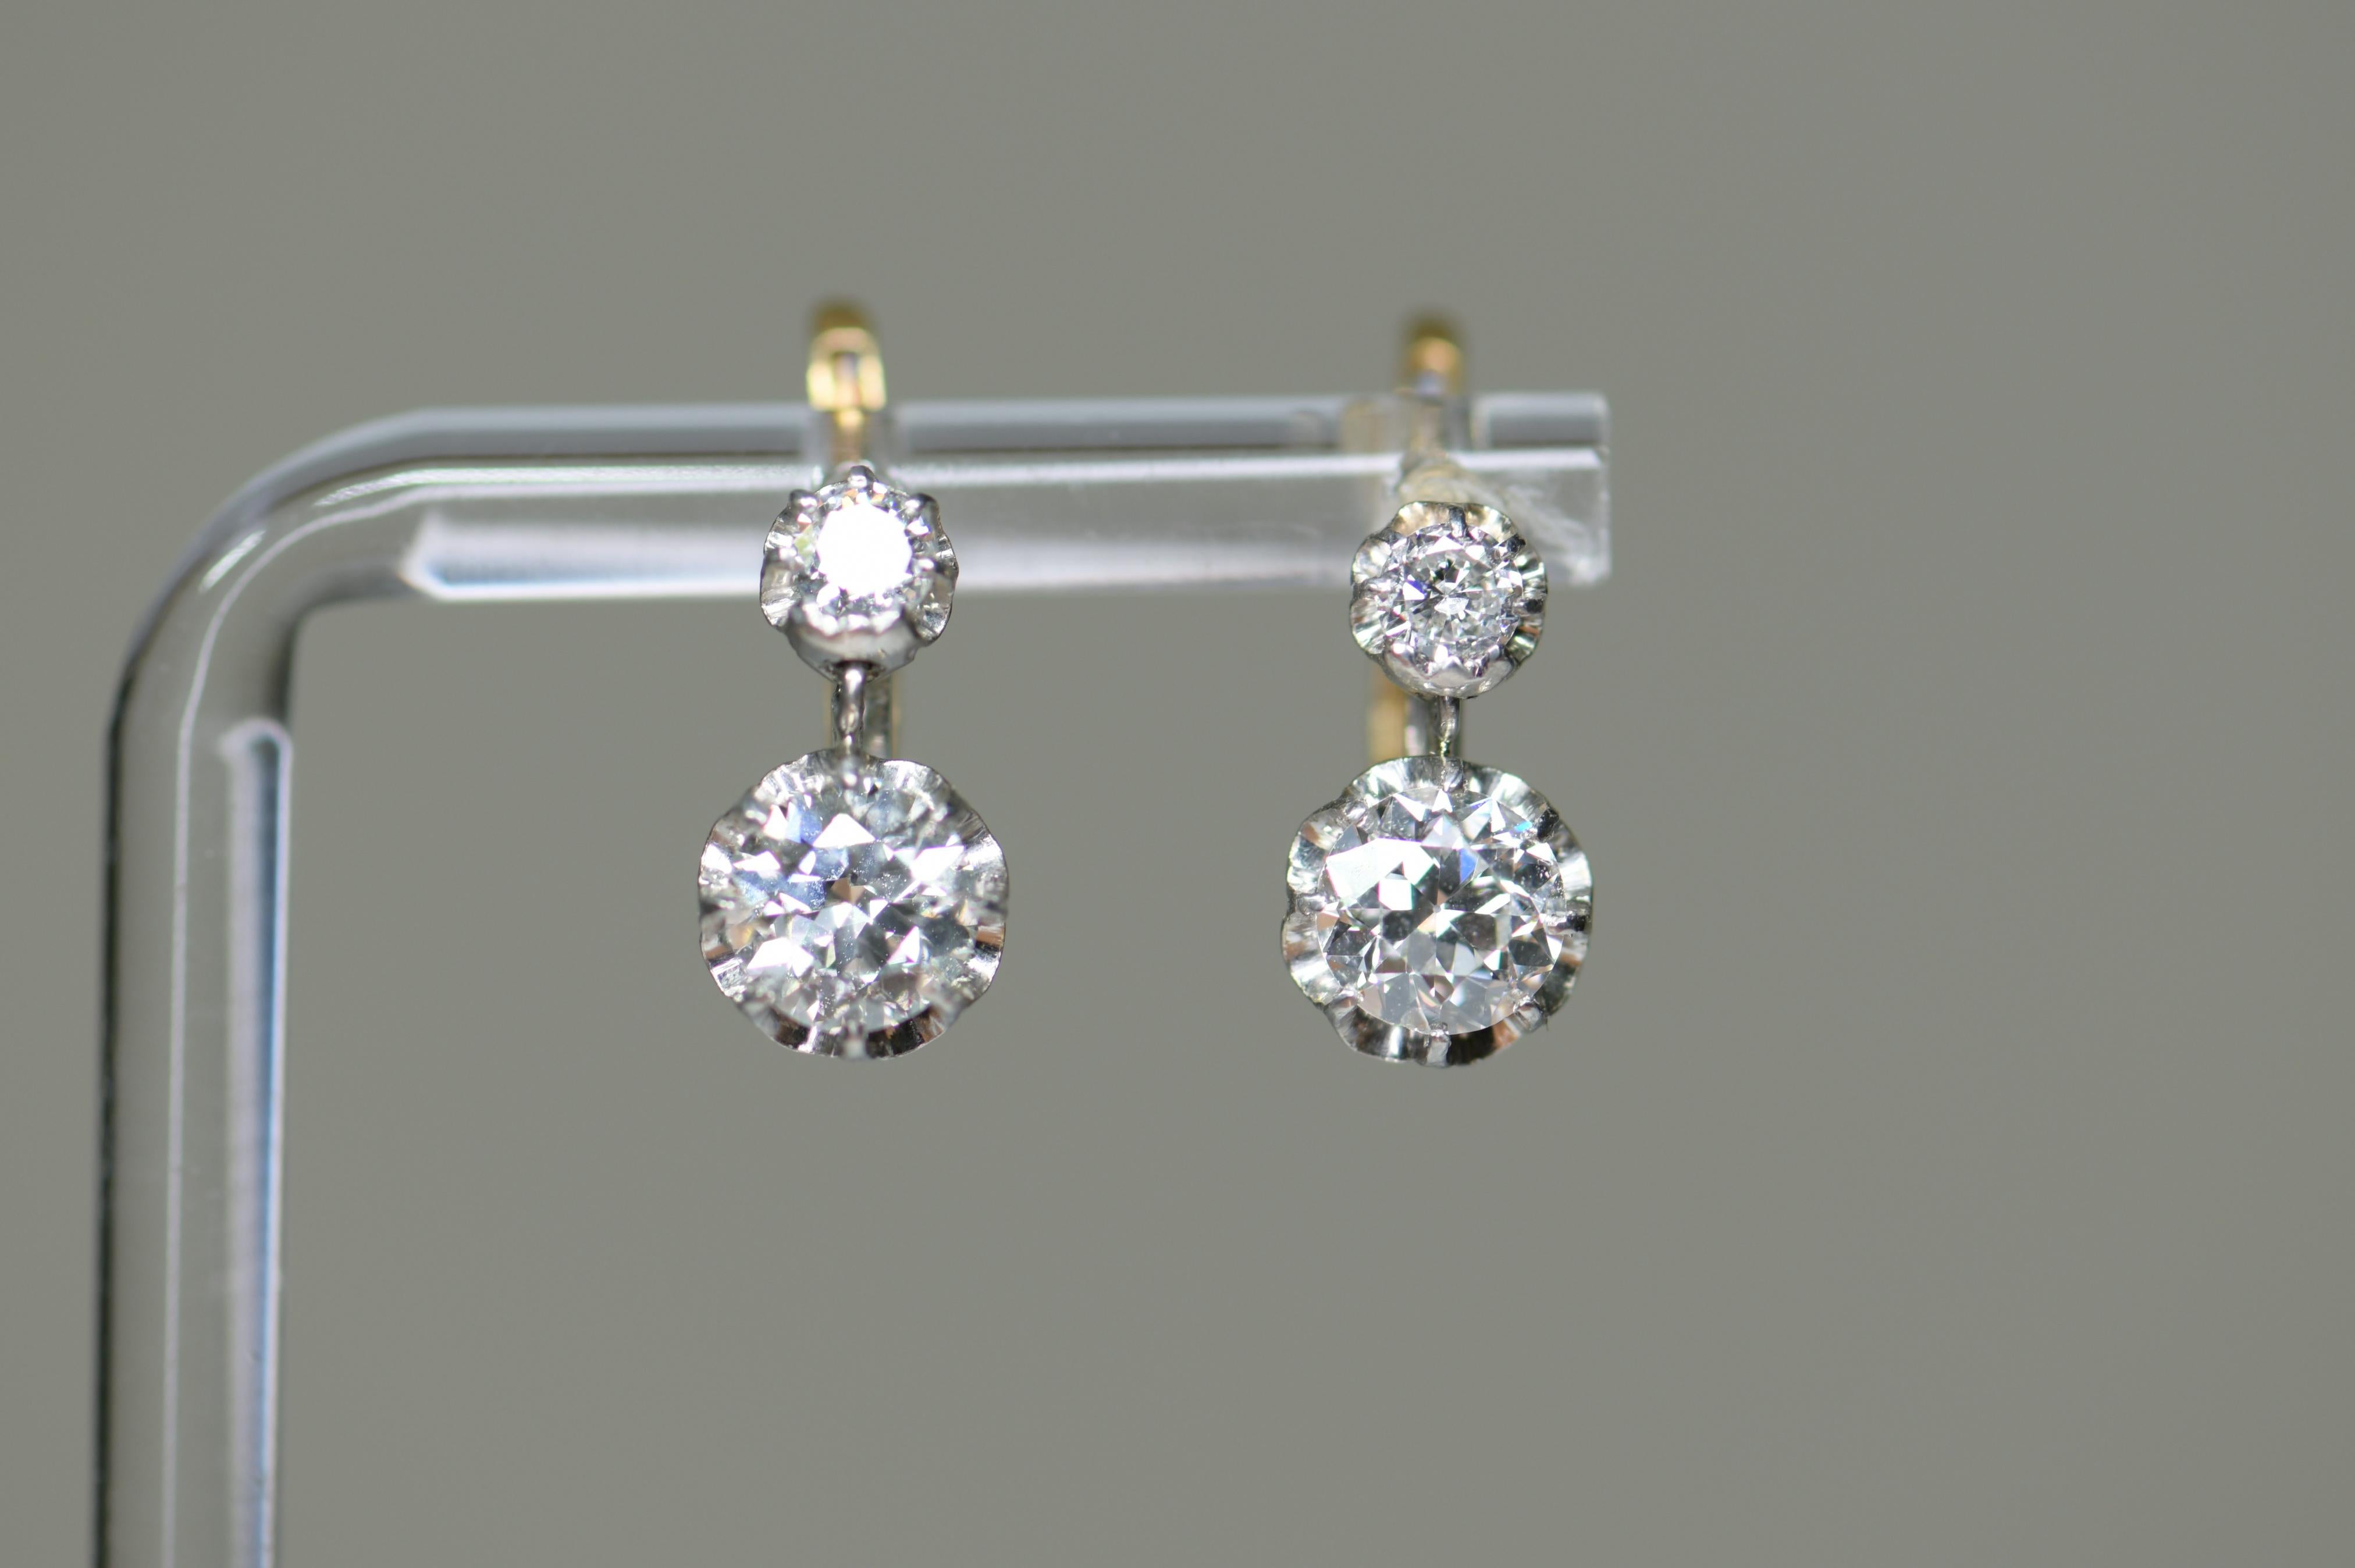 A very bright and well-matched pair of diamond earrings made circa 1920.  These earrings feature both two old European set in platinum over 18K yellow gold with a front clasping hinge. The diamonds drop just below the ear, suitable for both day and